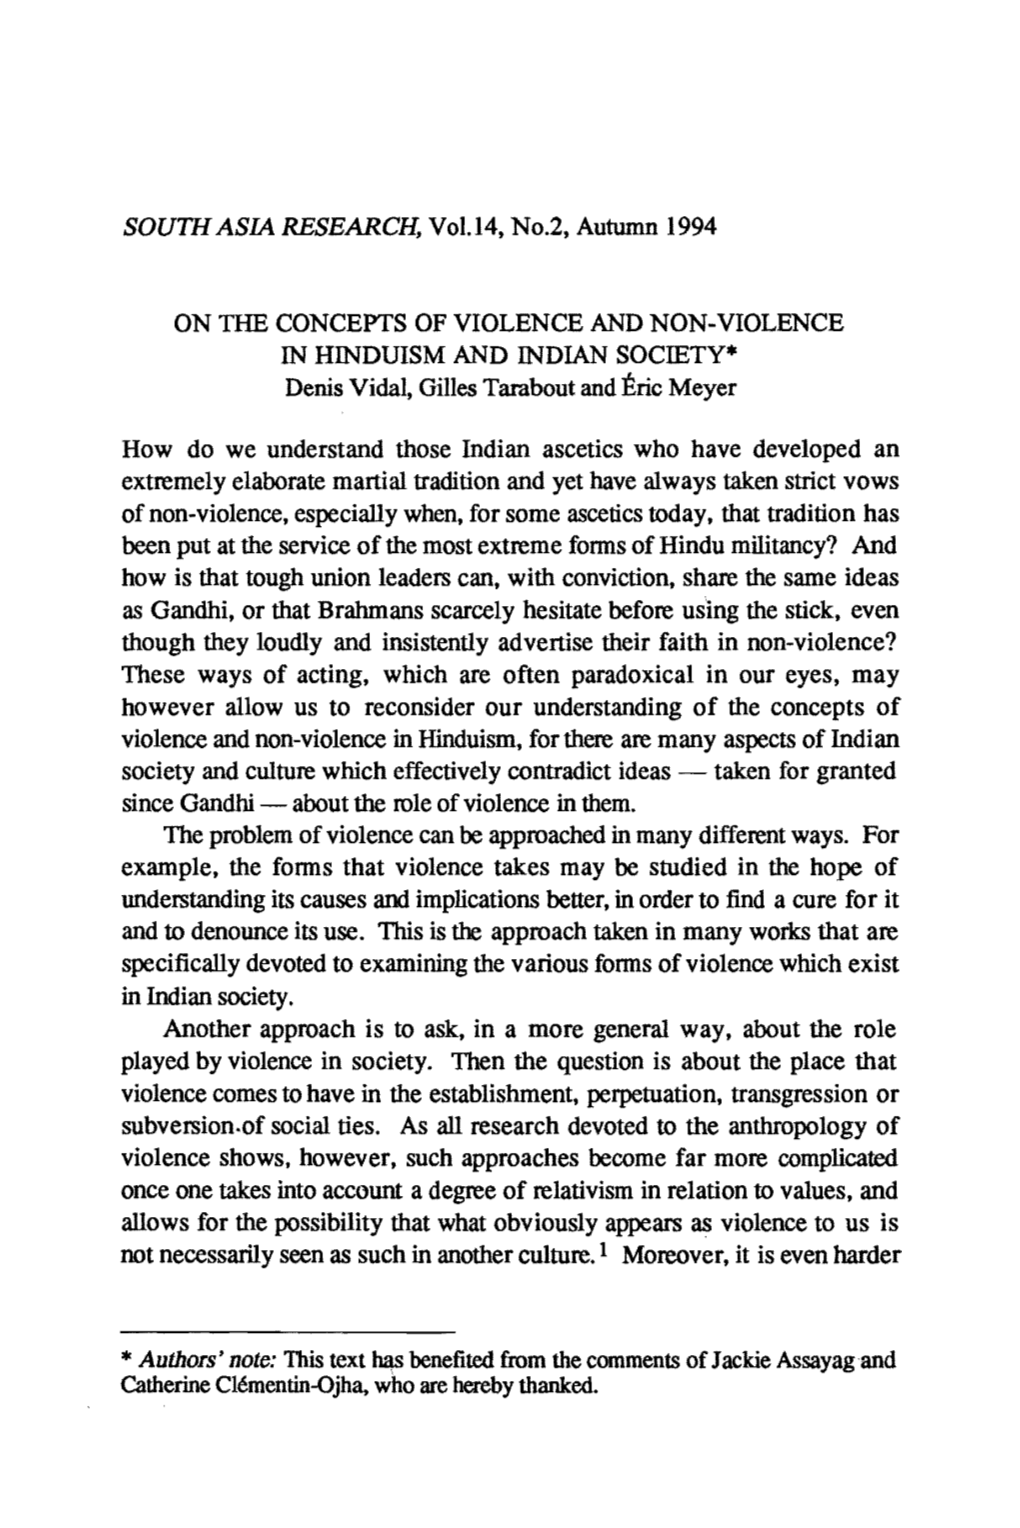 On the Concepts of Violence and Non-Violence in Hinduism and Indian Society